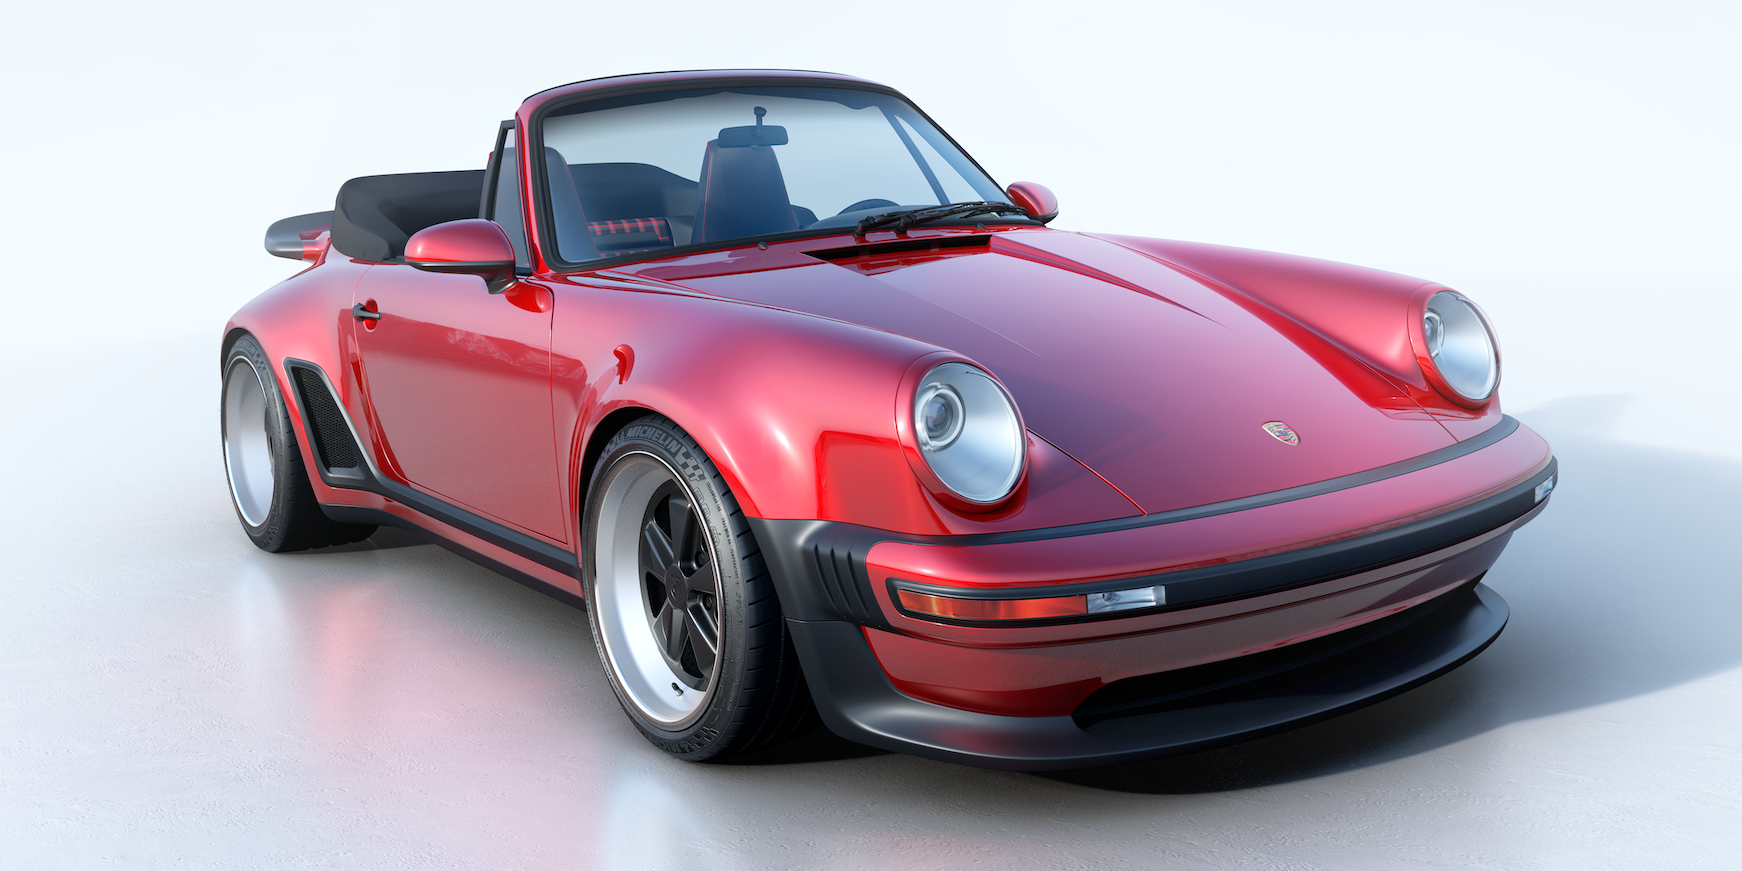 Singer's First-Ever Convertible Is a Reimagined 911 Turbo